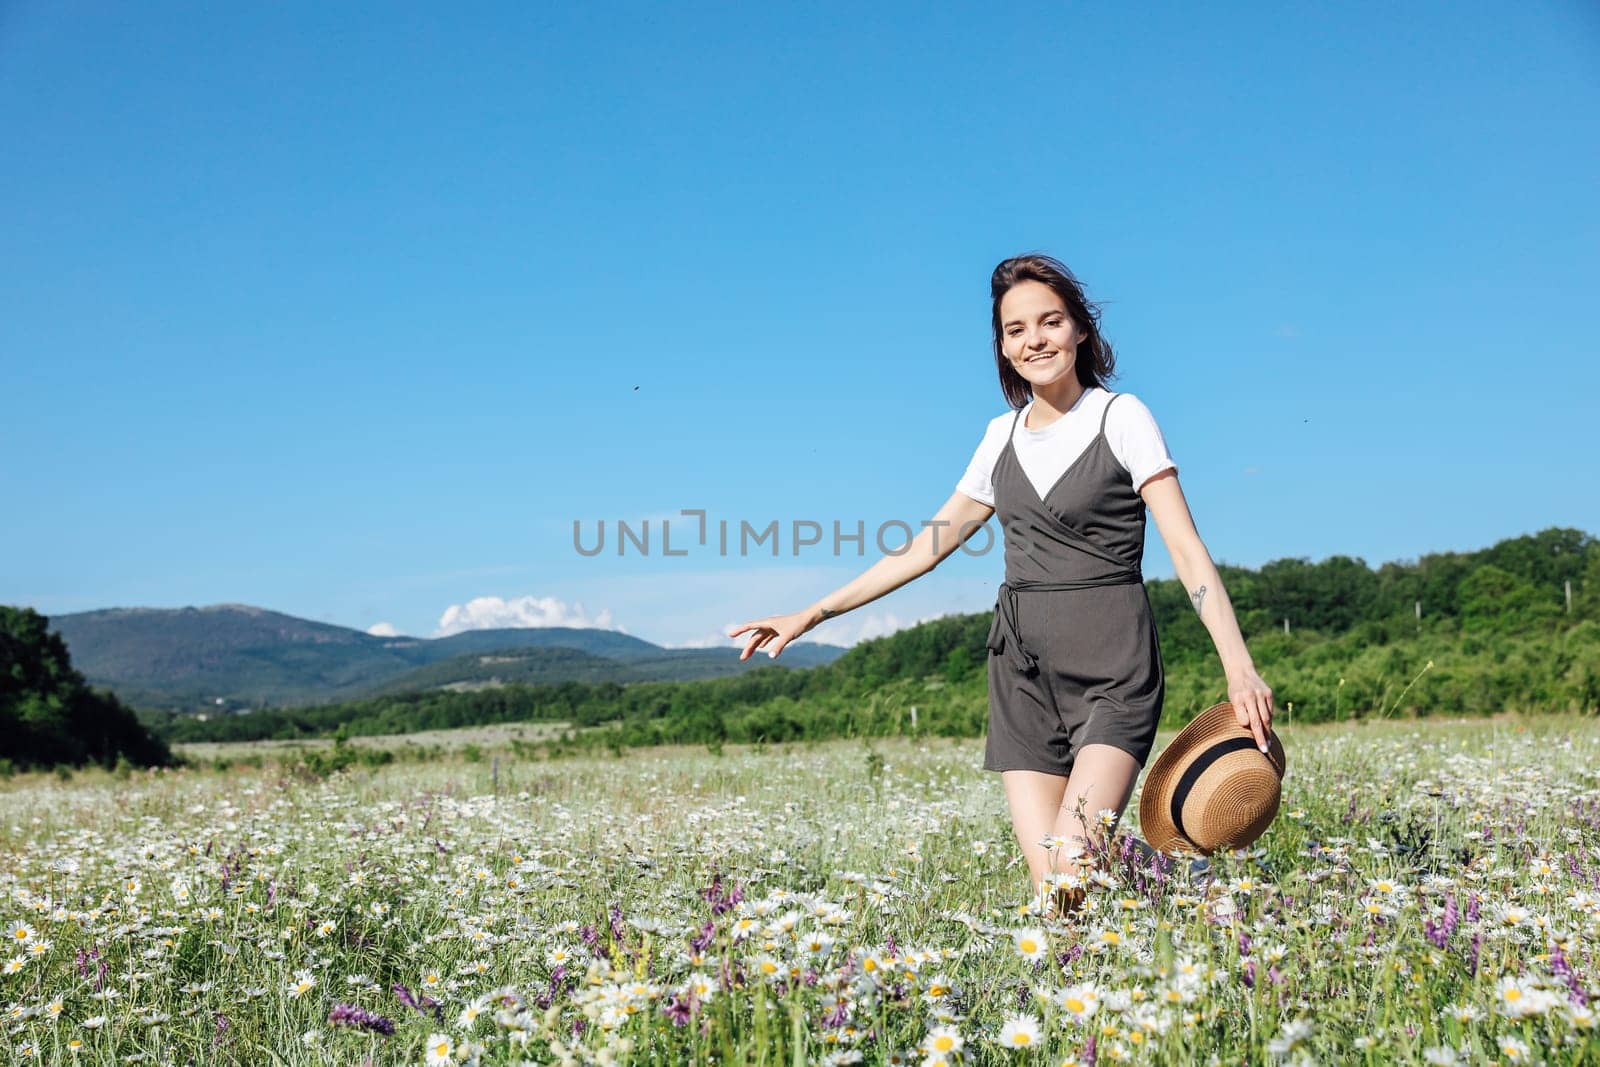 in nature, a woman with a hat runs into a field with daisies flowers by Simakov